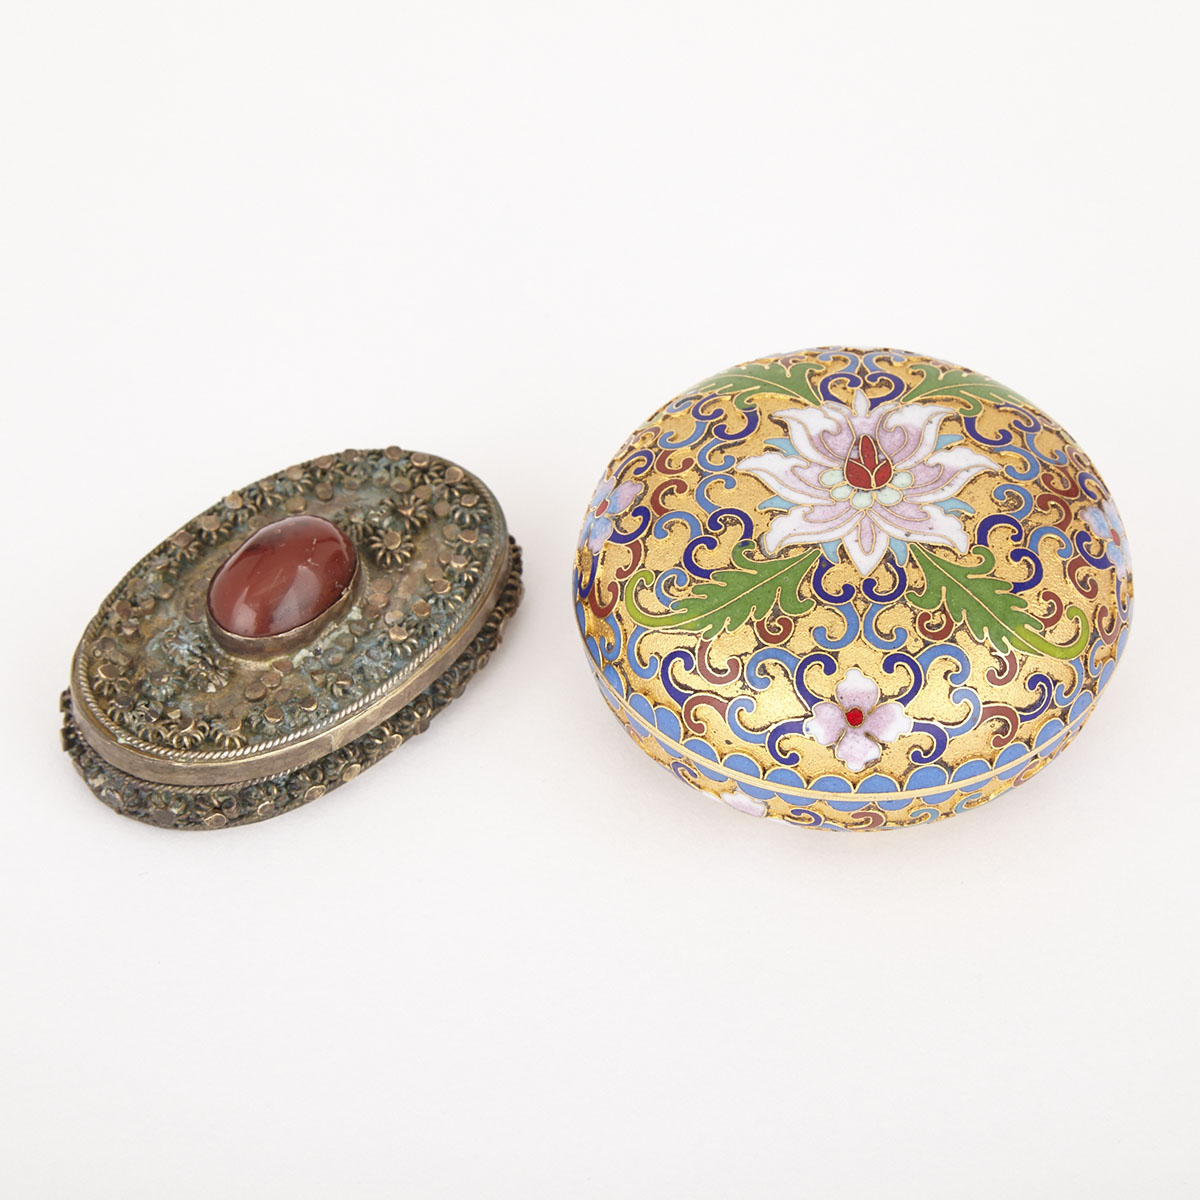 A Persian Cloisonne Cosmetic Box and a Canton Cloisonne, 19th and 20th Century